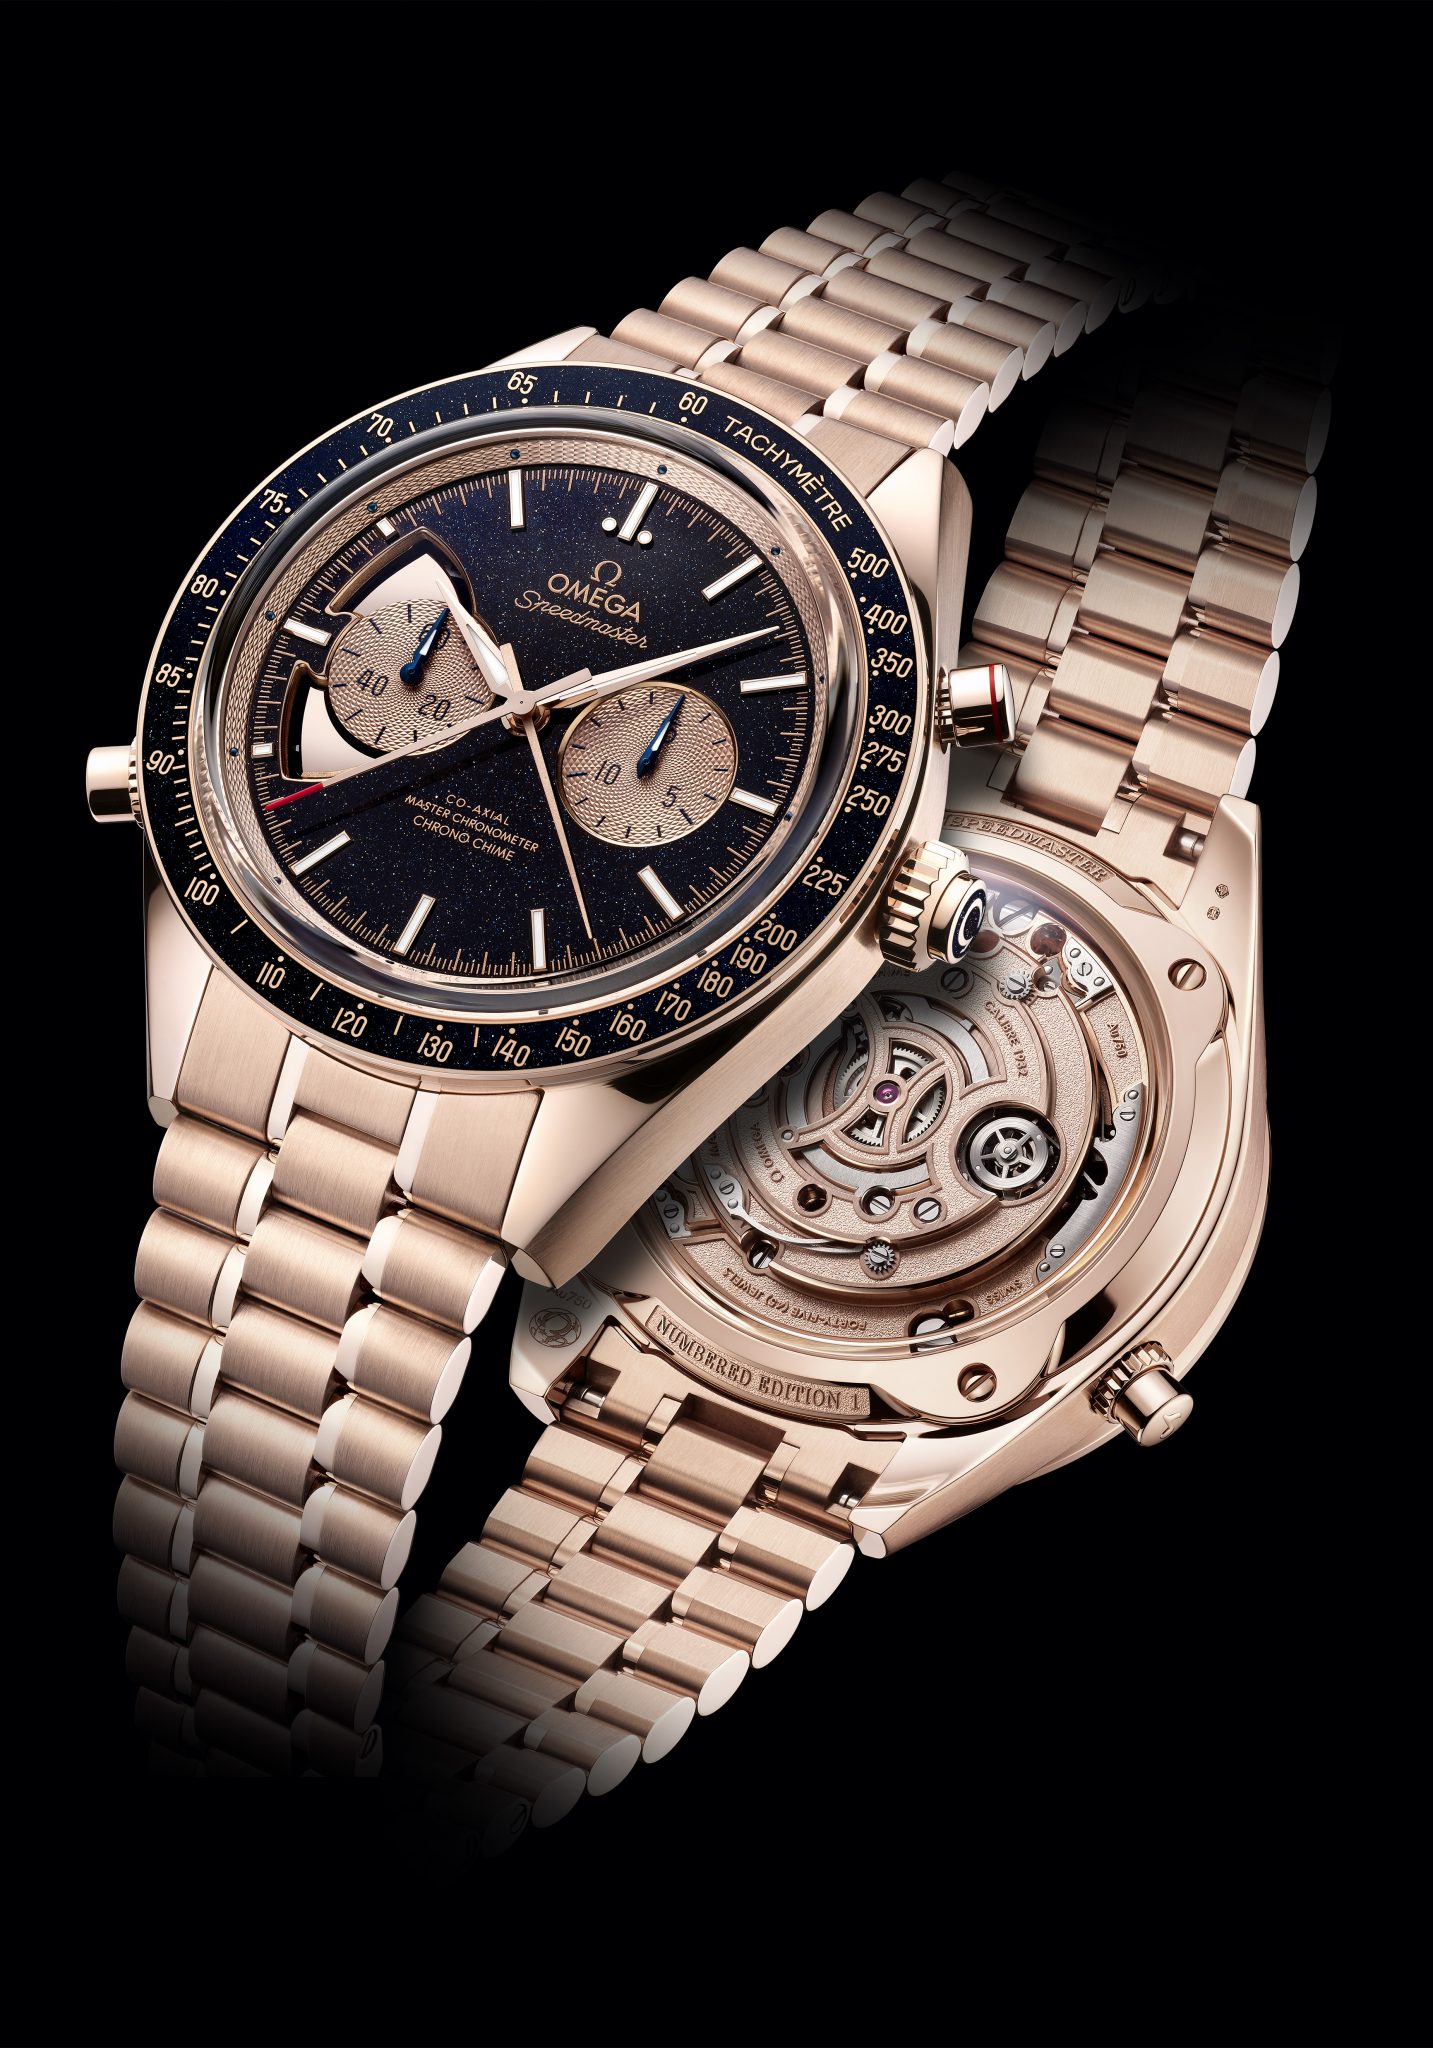 Omega teams up with Blancpain to create golden chiming movement